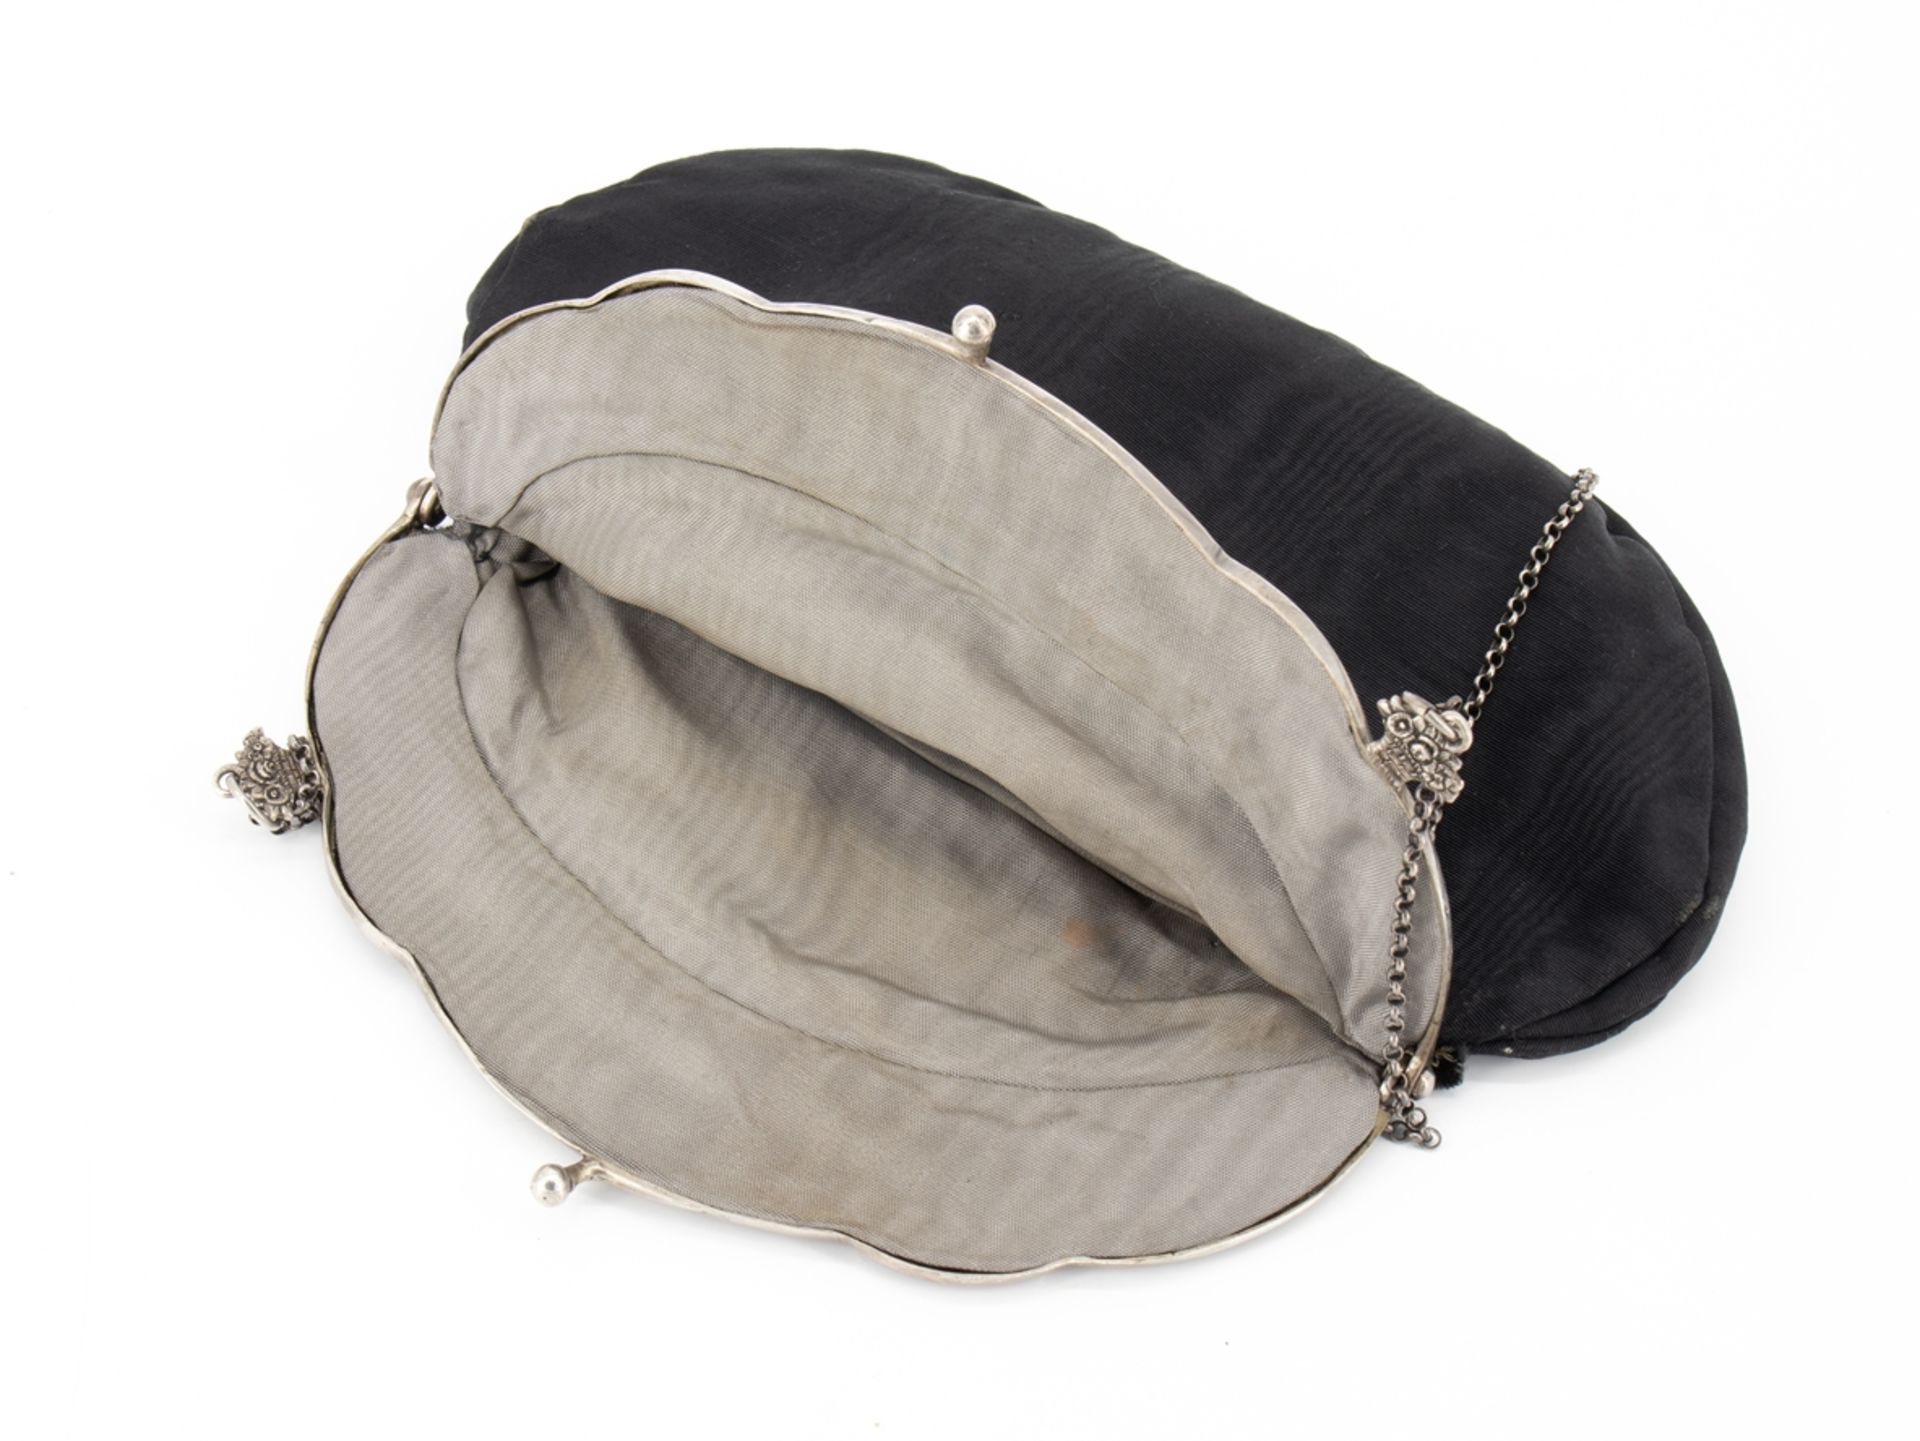 An evening bag with a 13-lot silver clasp, mid-19th century. - Image 2 of 4